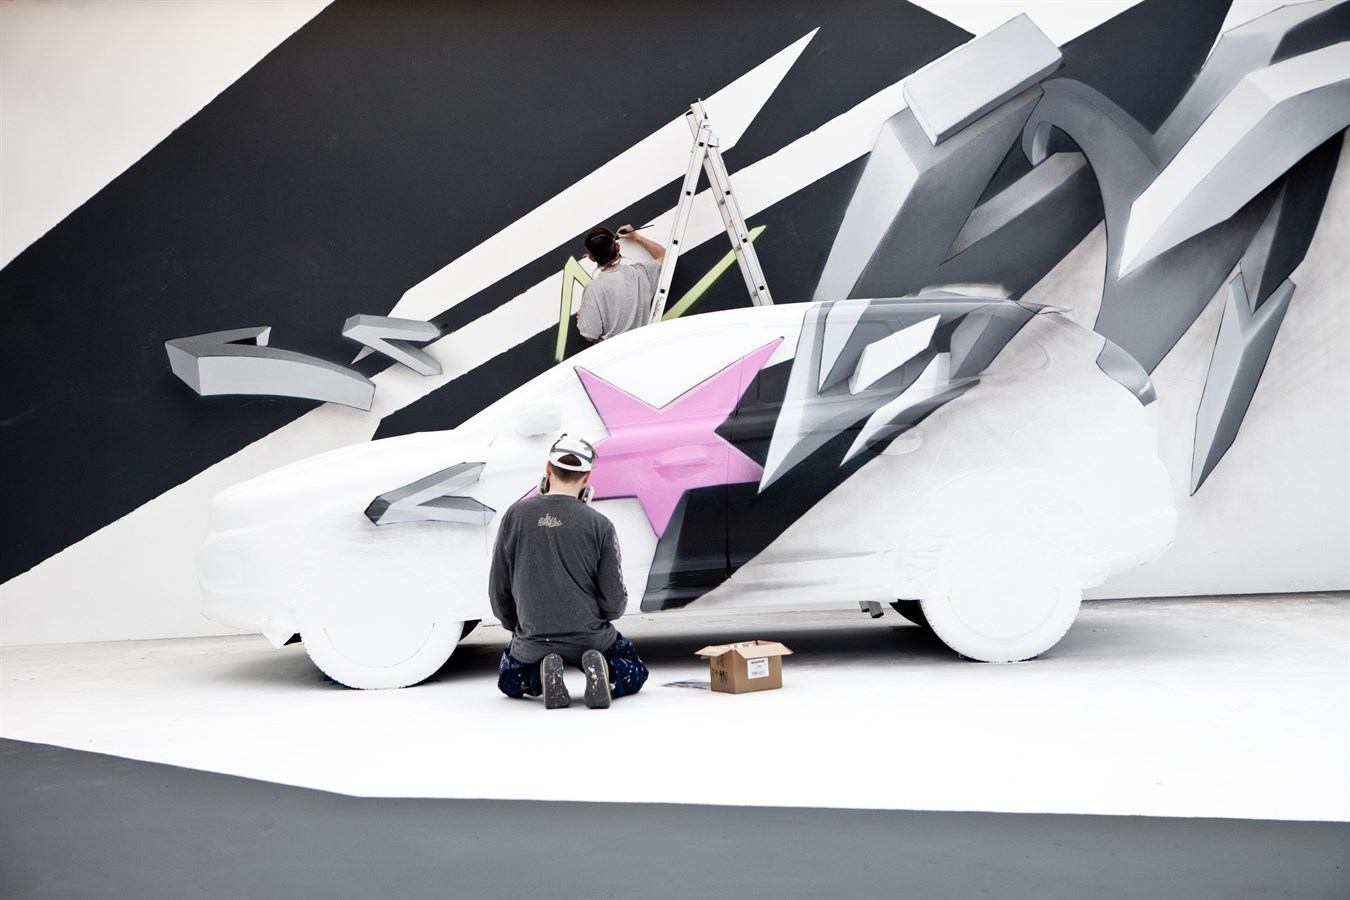 International artists turn Volvo XC60 into a work of art at Volvo Art Session